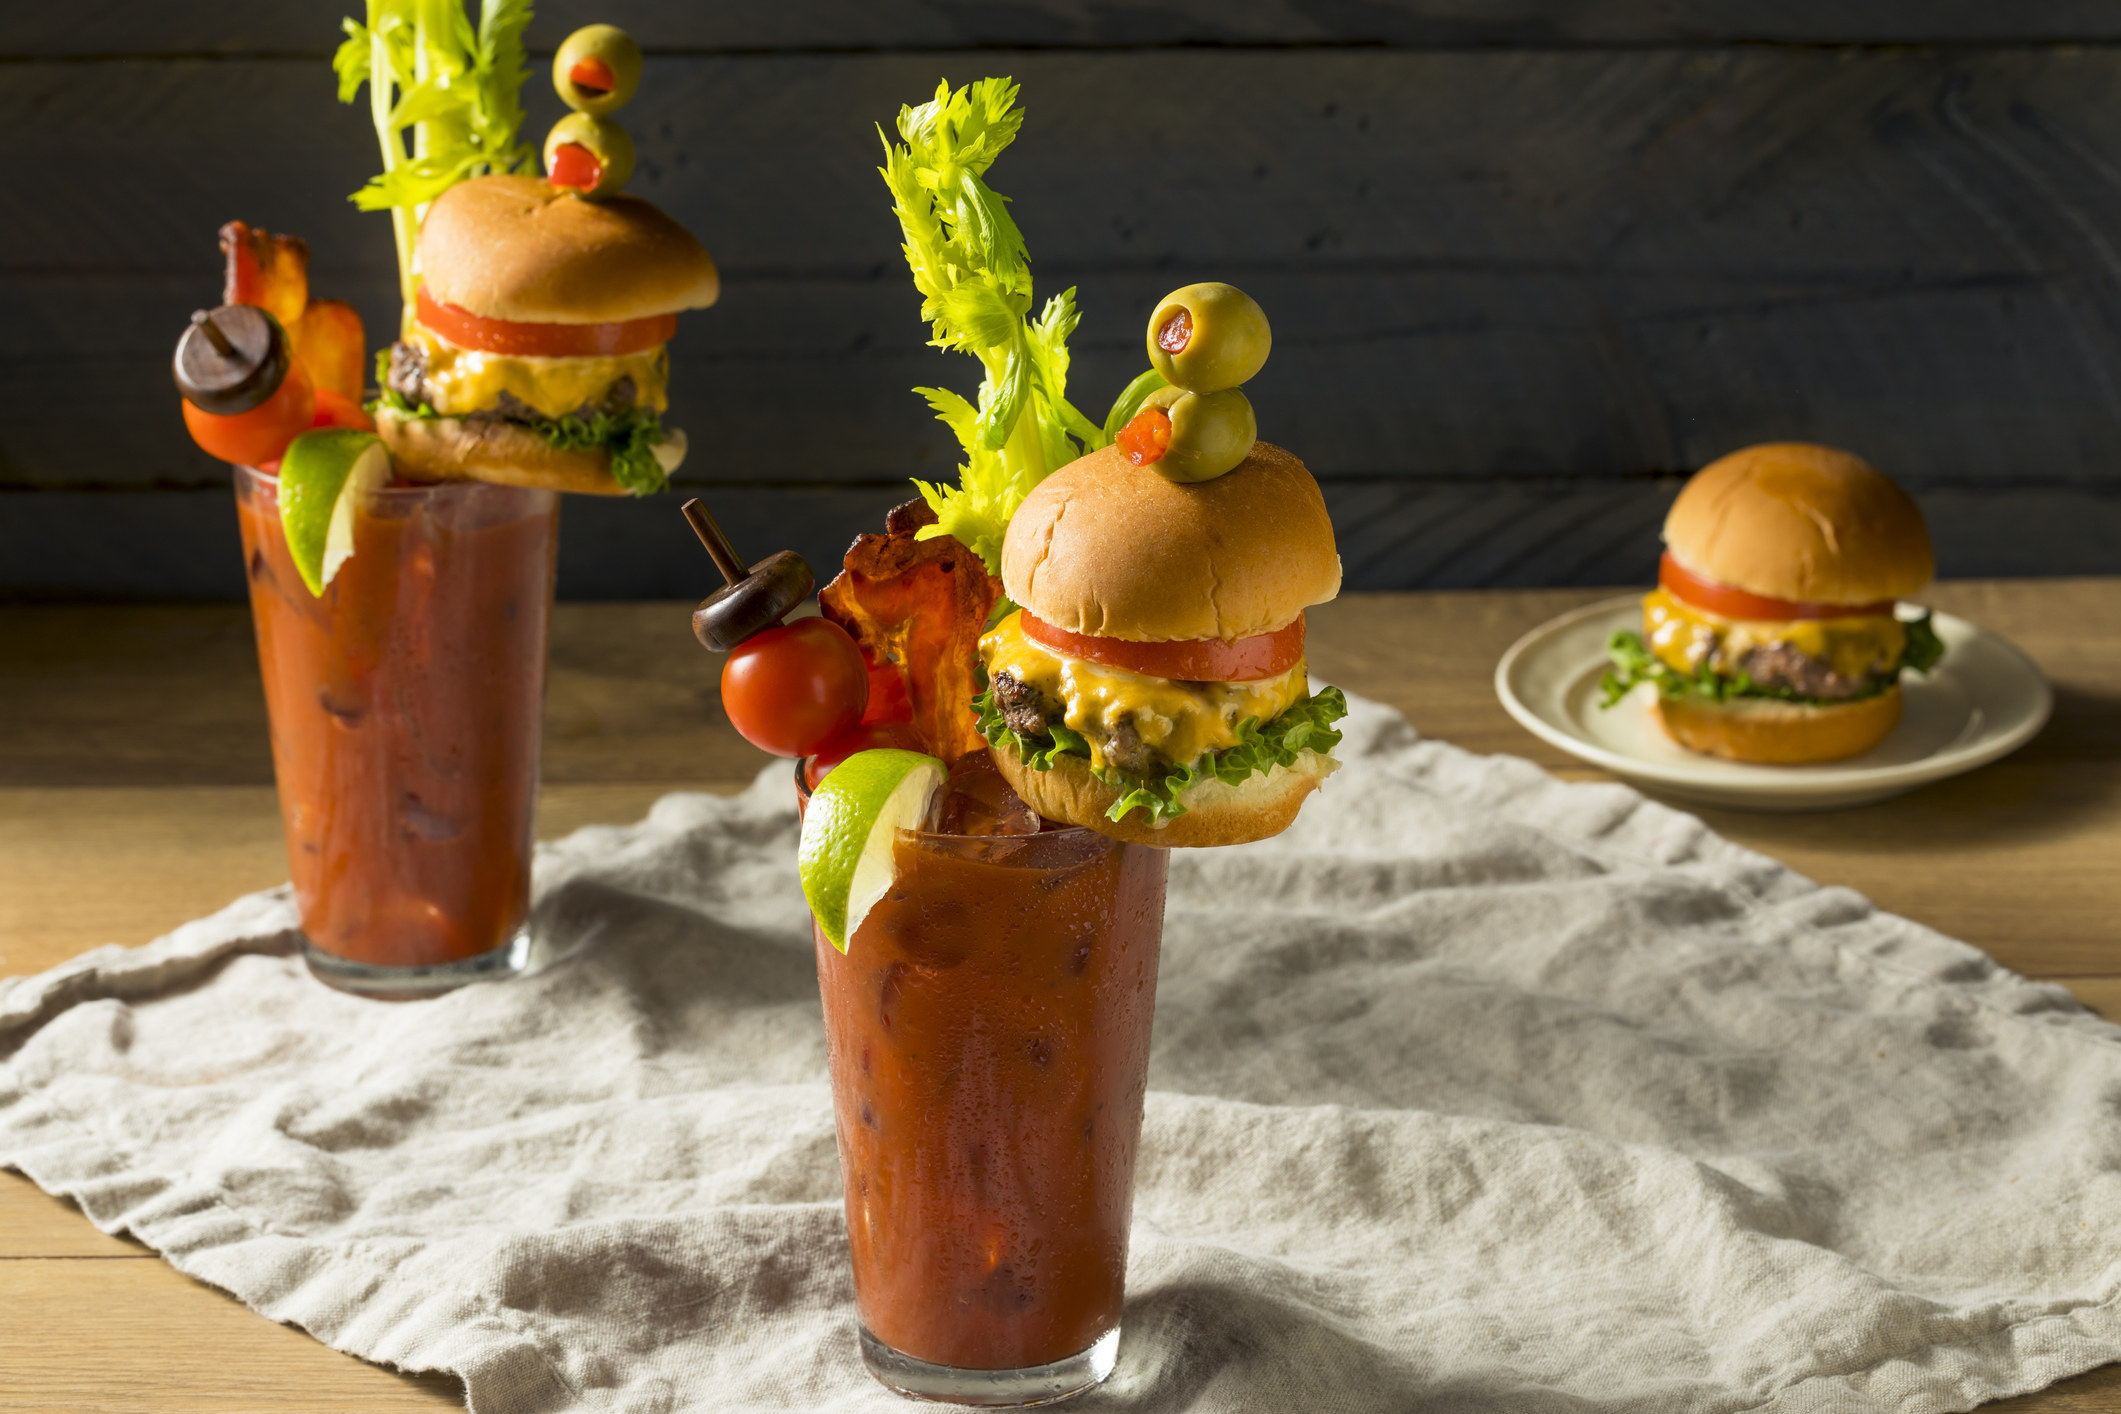 Bloody Marys with cheeseburger garnishes